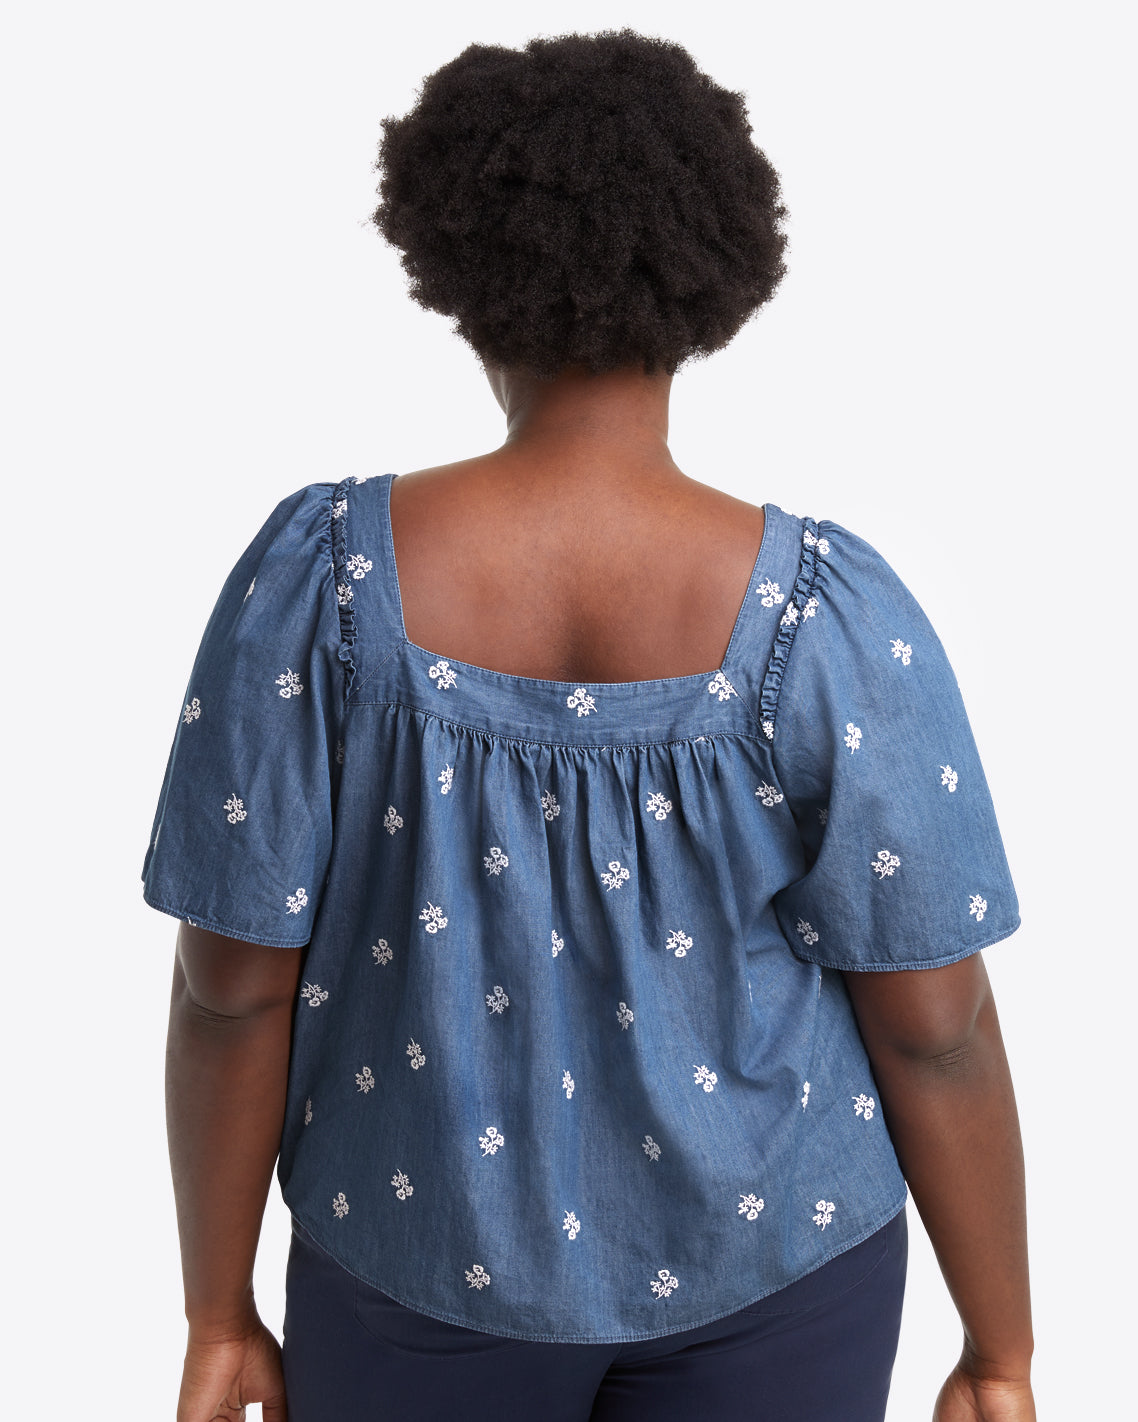 Maren Top in Embroidered Chambray